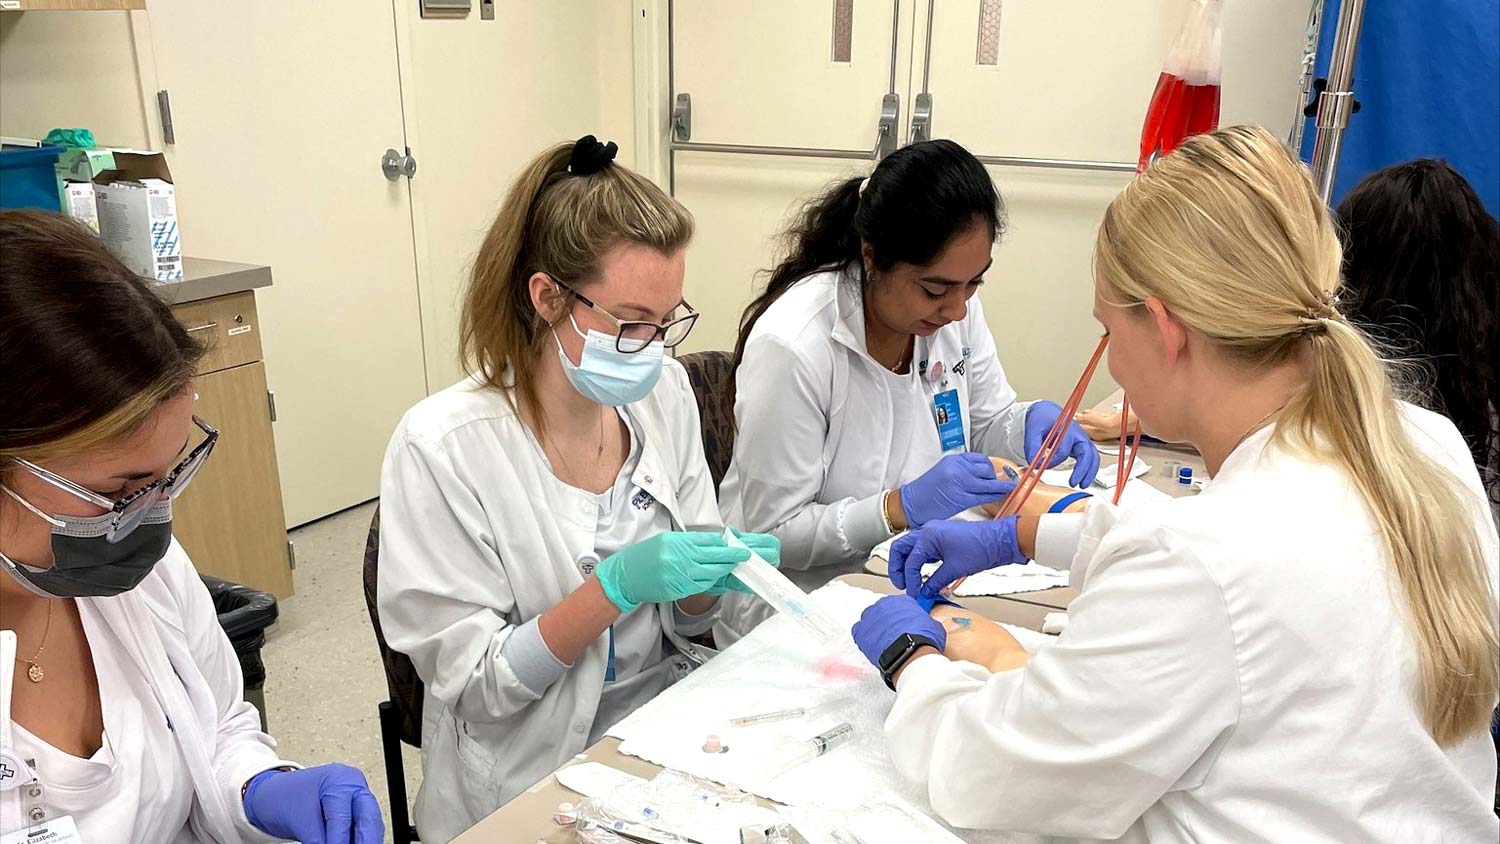 Nursing students participating in class activity